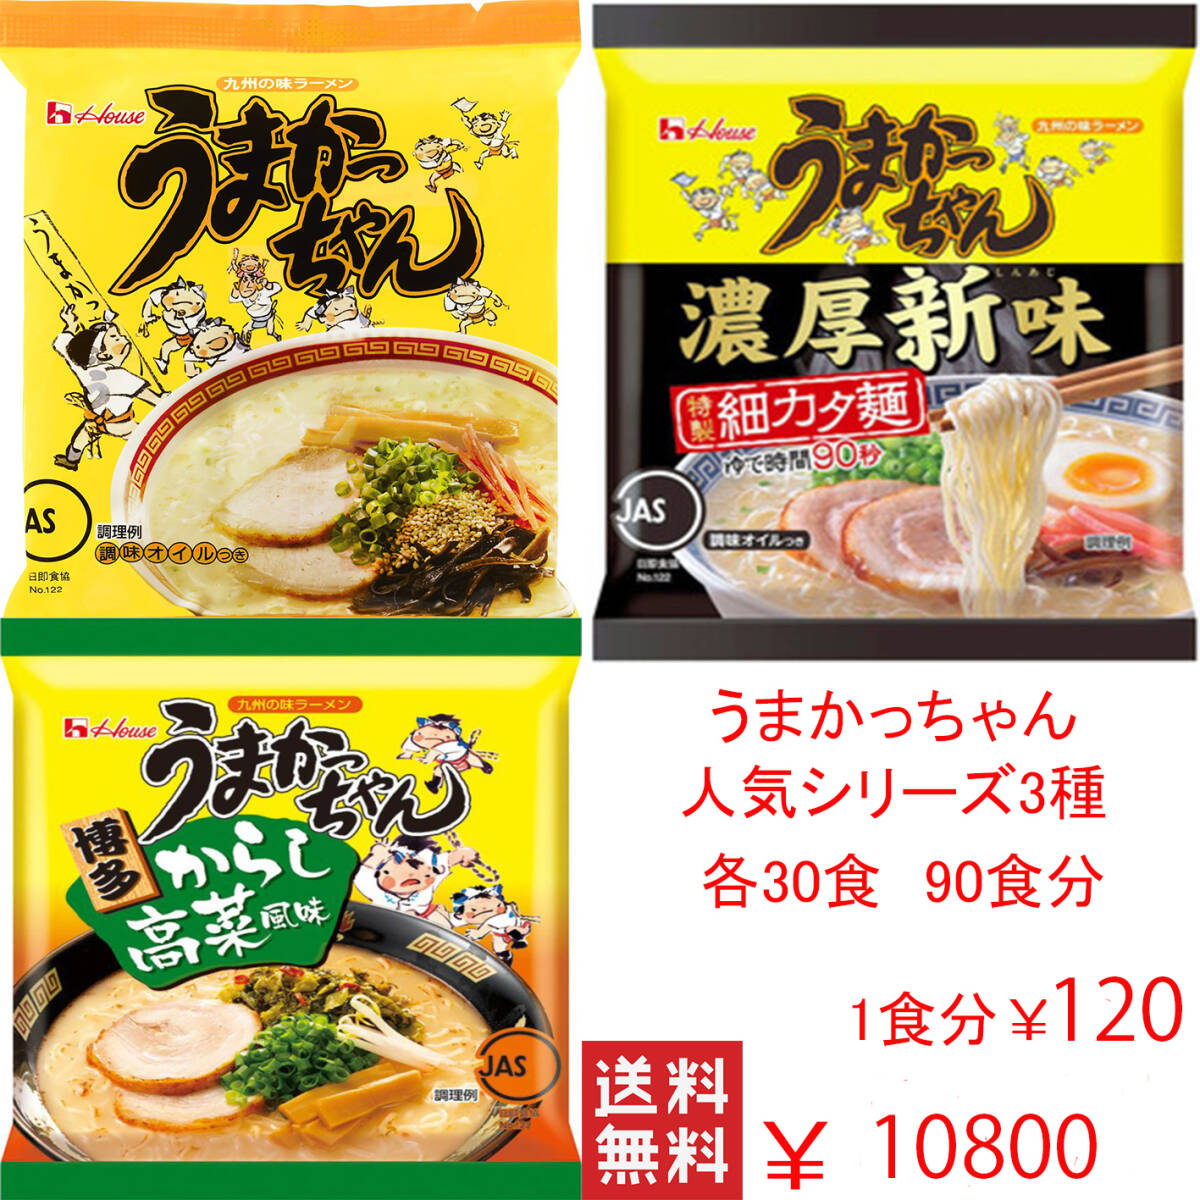  great special price super-discount limited amount Y10800-Y9800 great popularity pig . ramen .... Chan popular series 3 kind each 30 meal minute 90 meal minute nationwide free shipping 4790